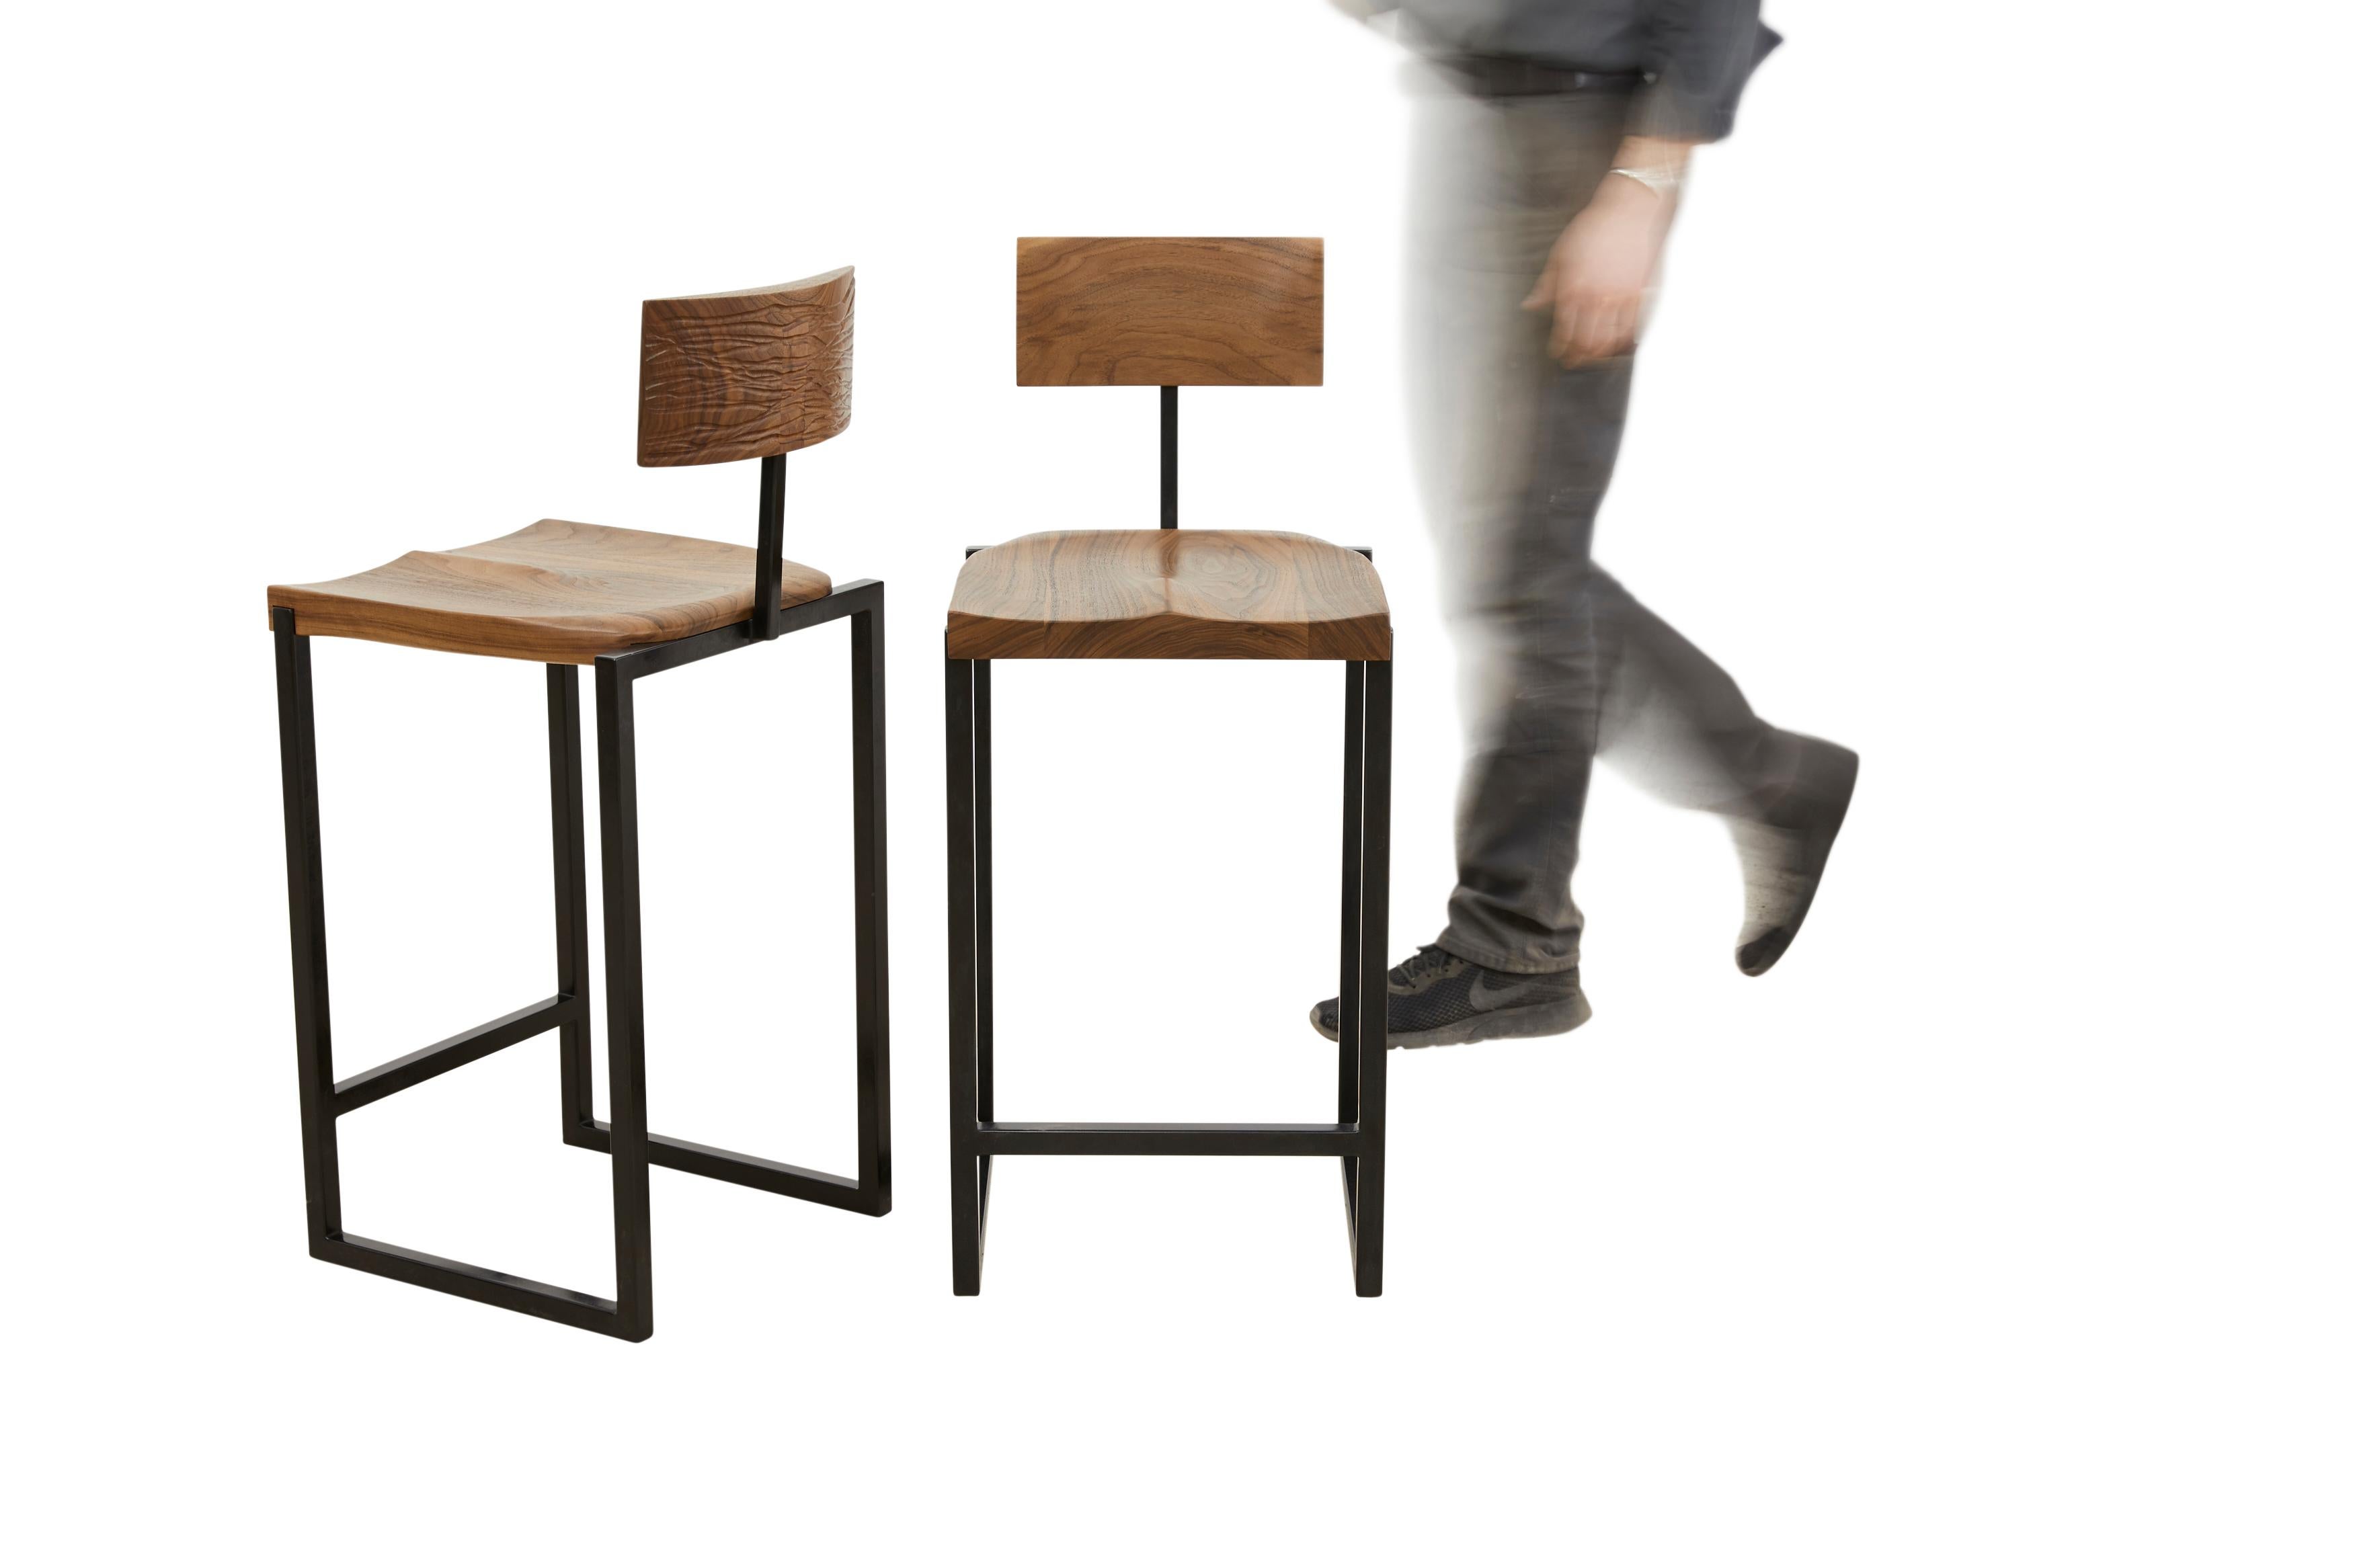 This stool is composed of a hand-shaped walnut wood seat and backrest that sits upon a blackened steel frame. Finished with oil, the rear face of each backrest features a unique carved drawing.